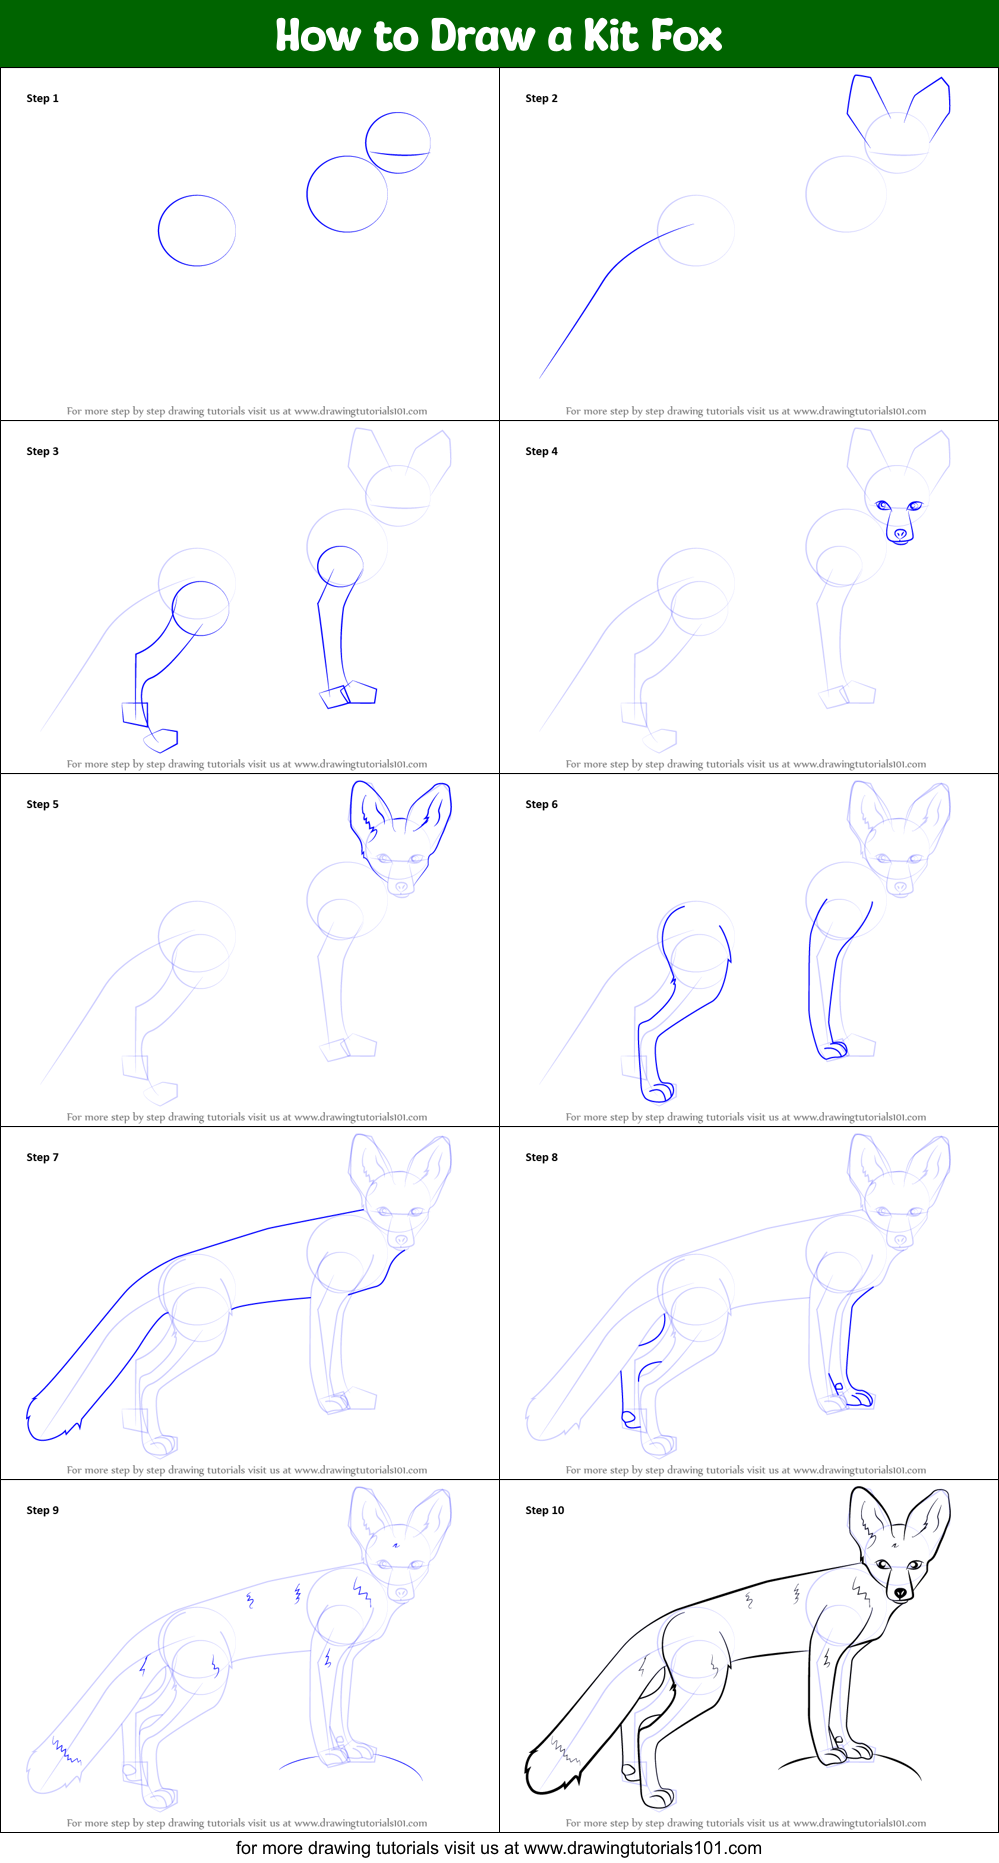 How to Draw a Kit Fox printable step by step drawing sheet